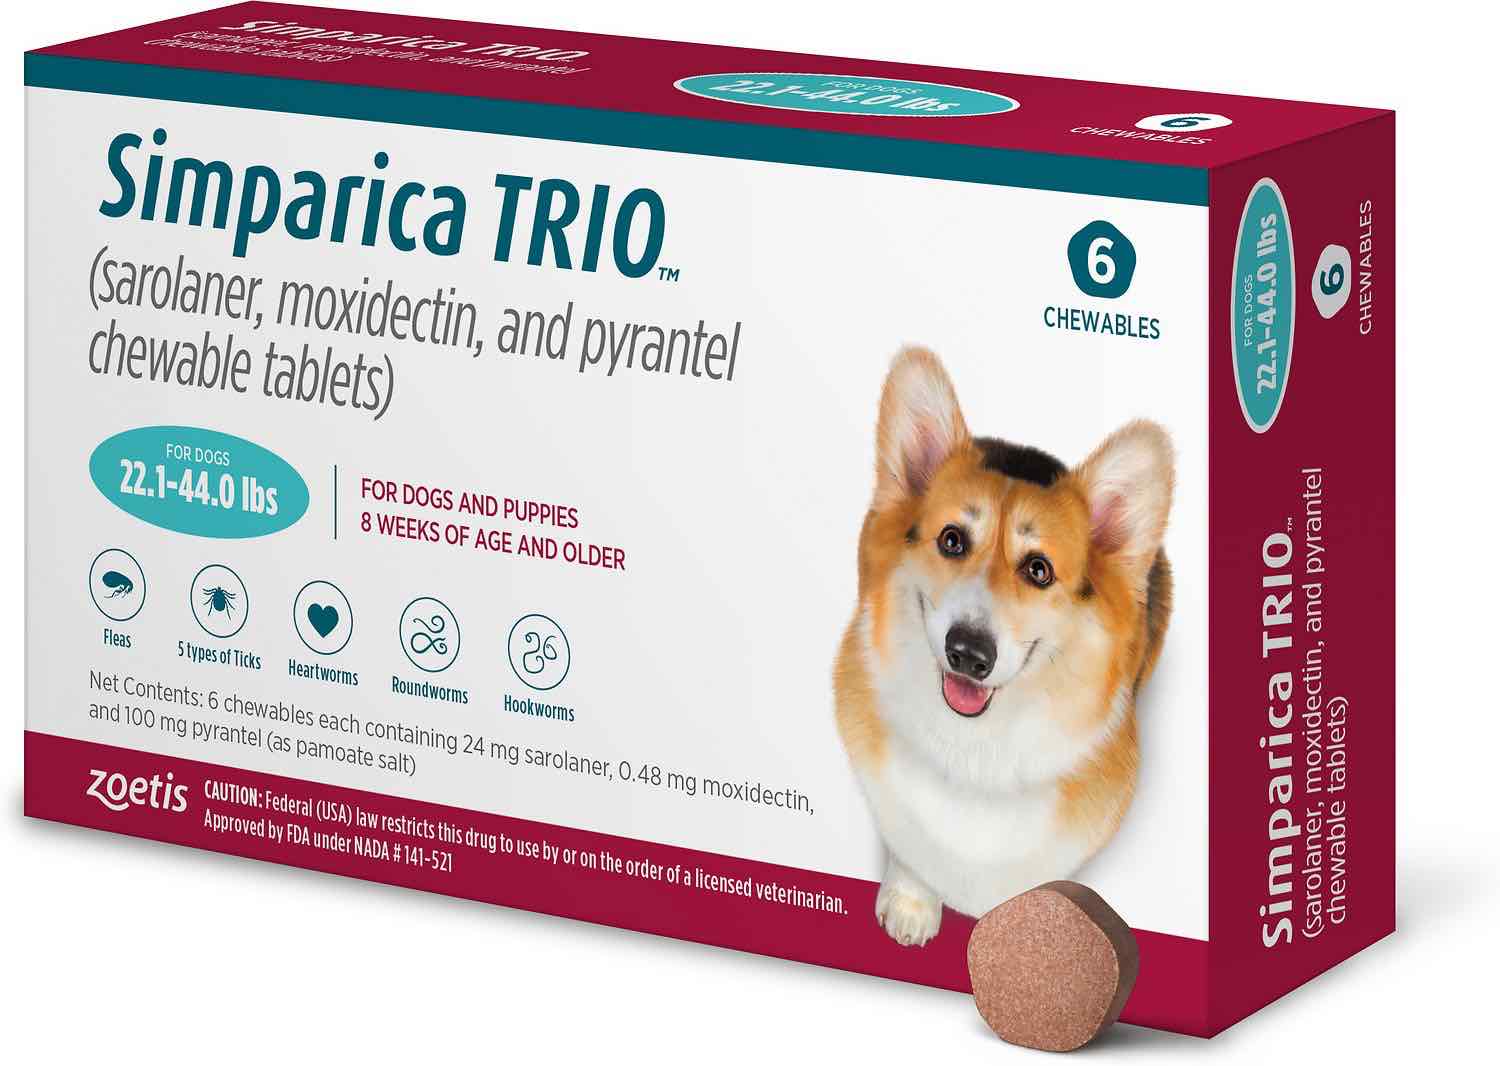 Simparica Trio 6 chewable tablets for dogs 22.1-44 lbs (Blue) 1